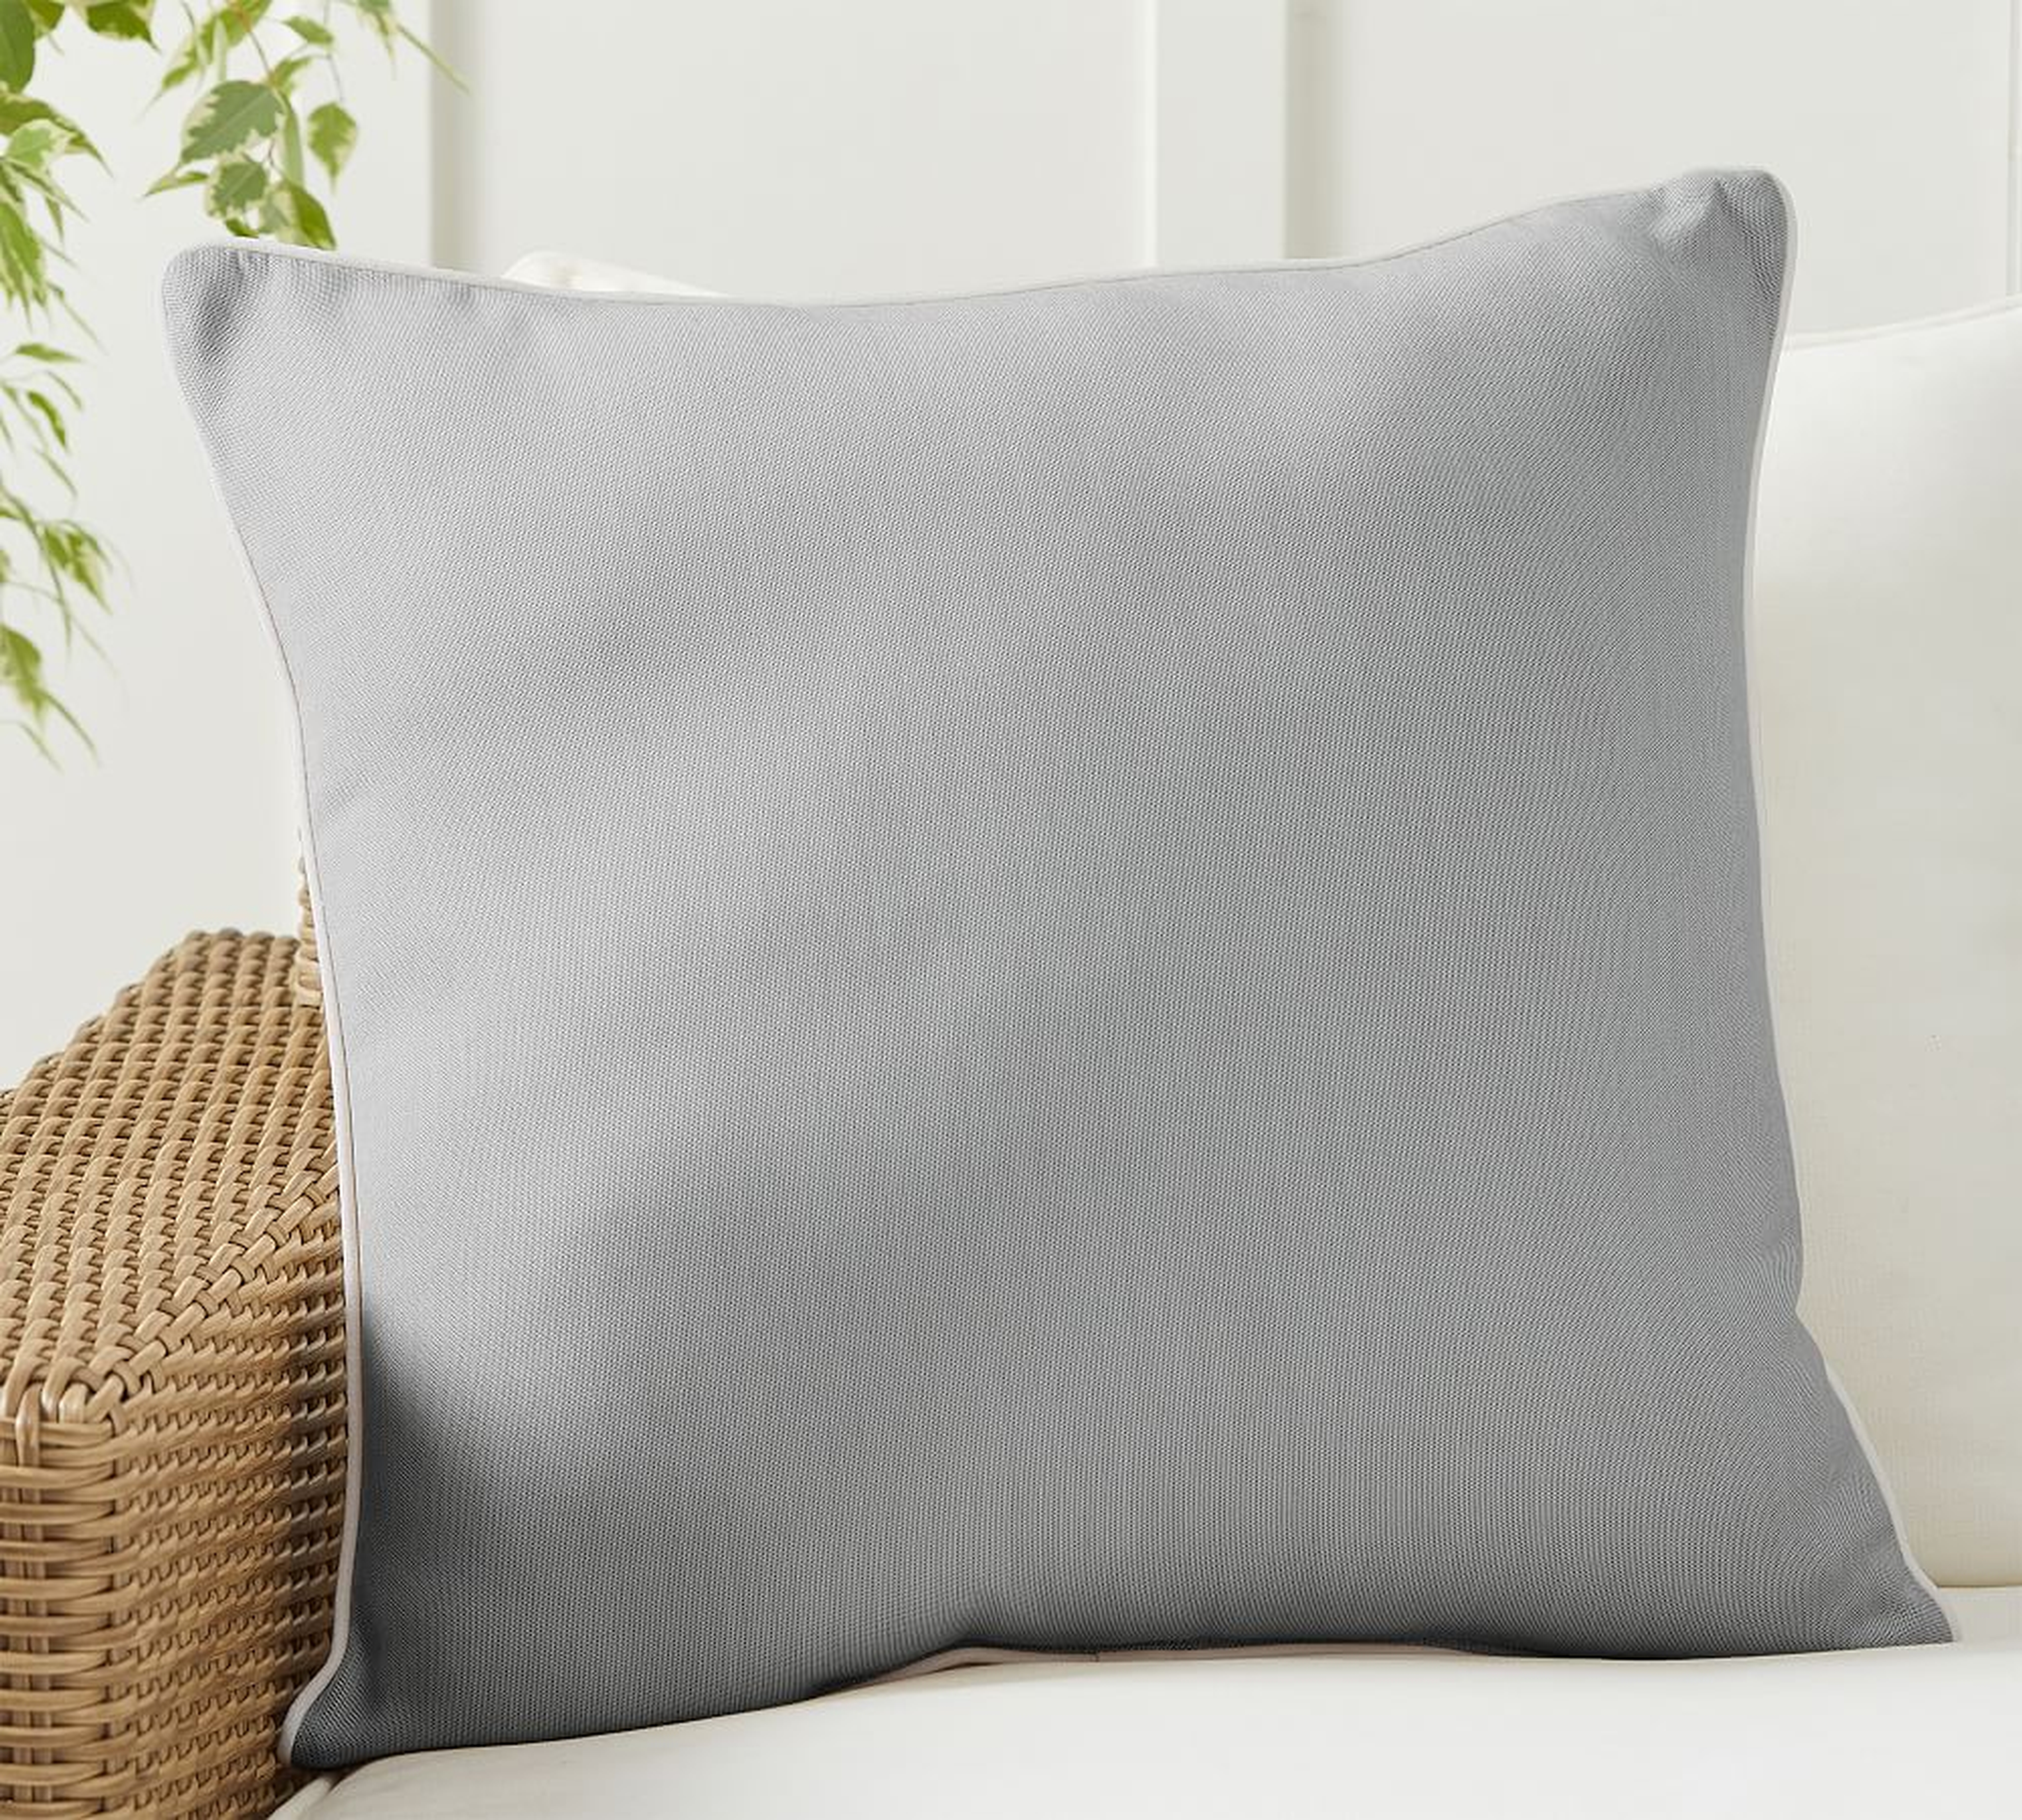 Sunbrella(R) Contrast Piped Solid Indoor/Outdoor Pillow, 24 x 24", Silver - Pottery Barn